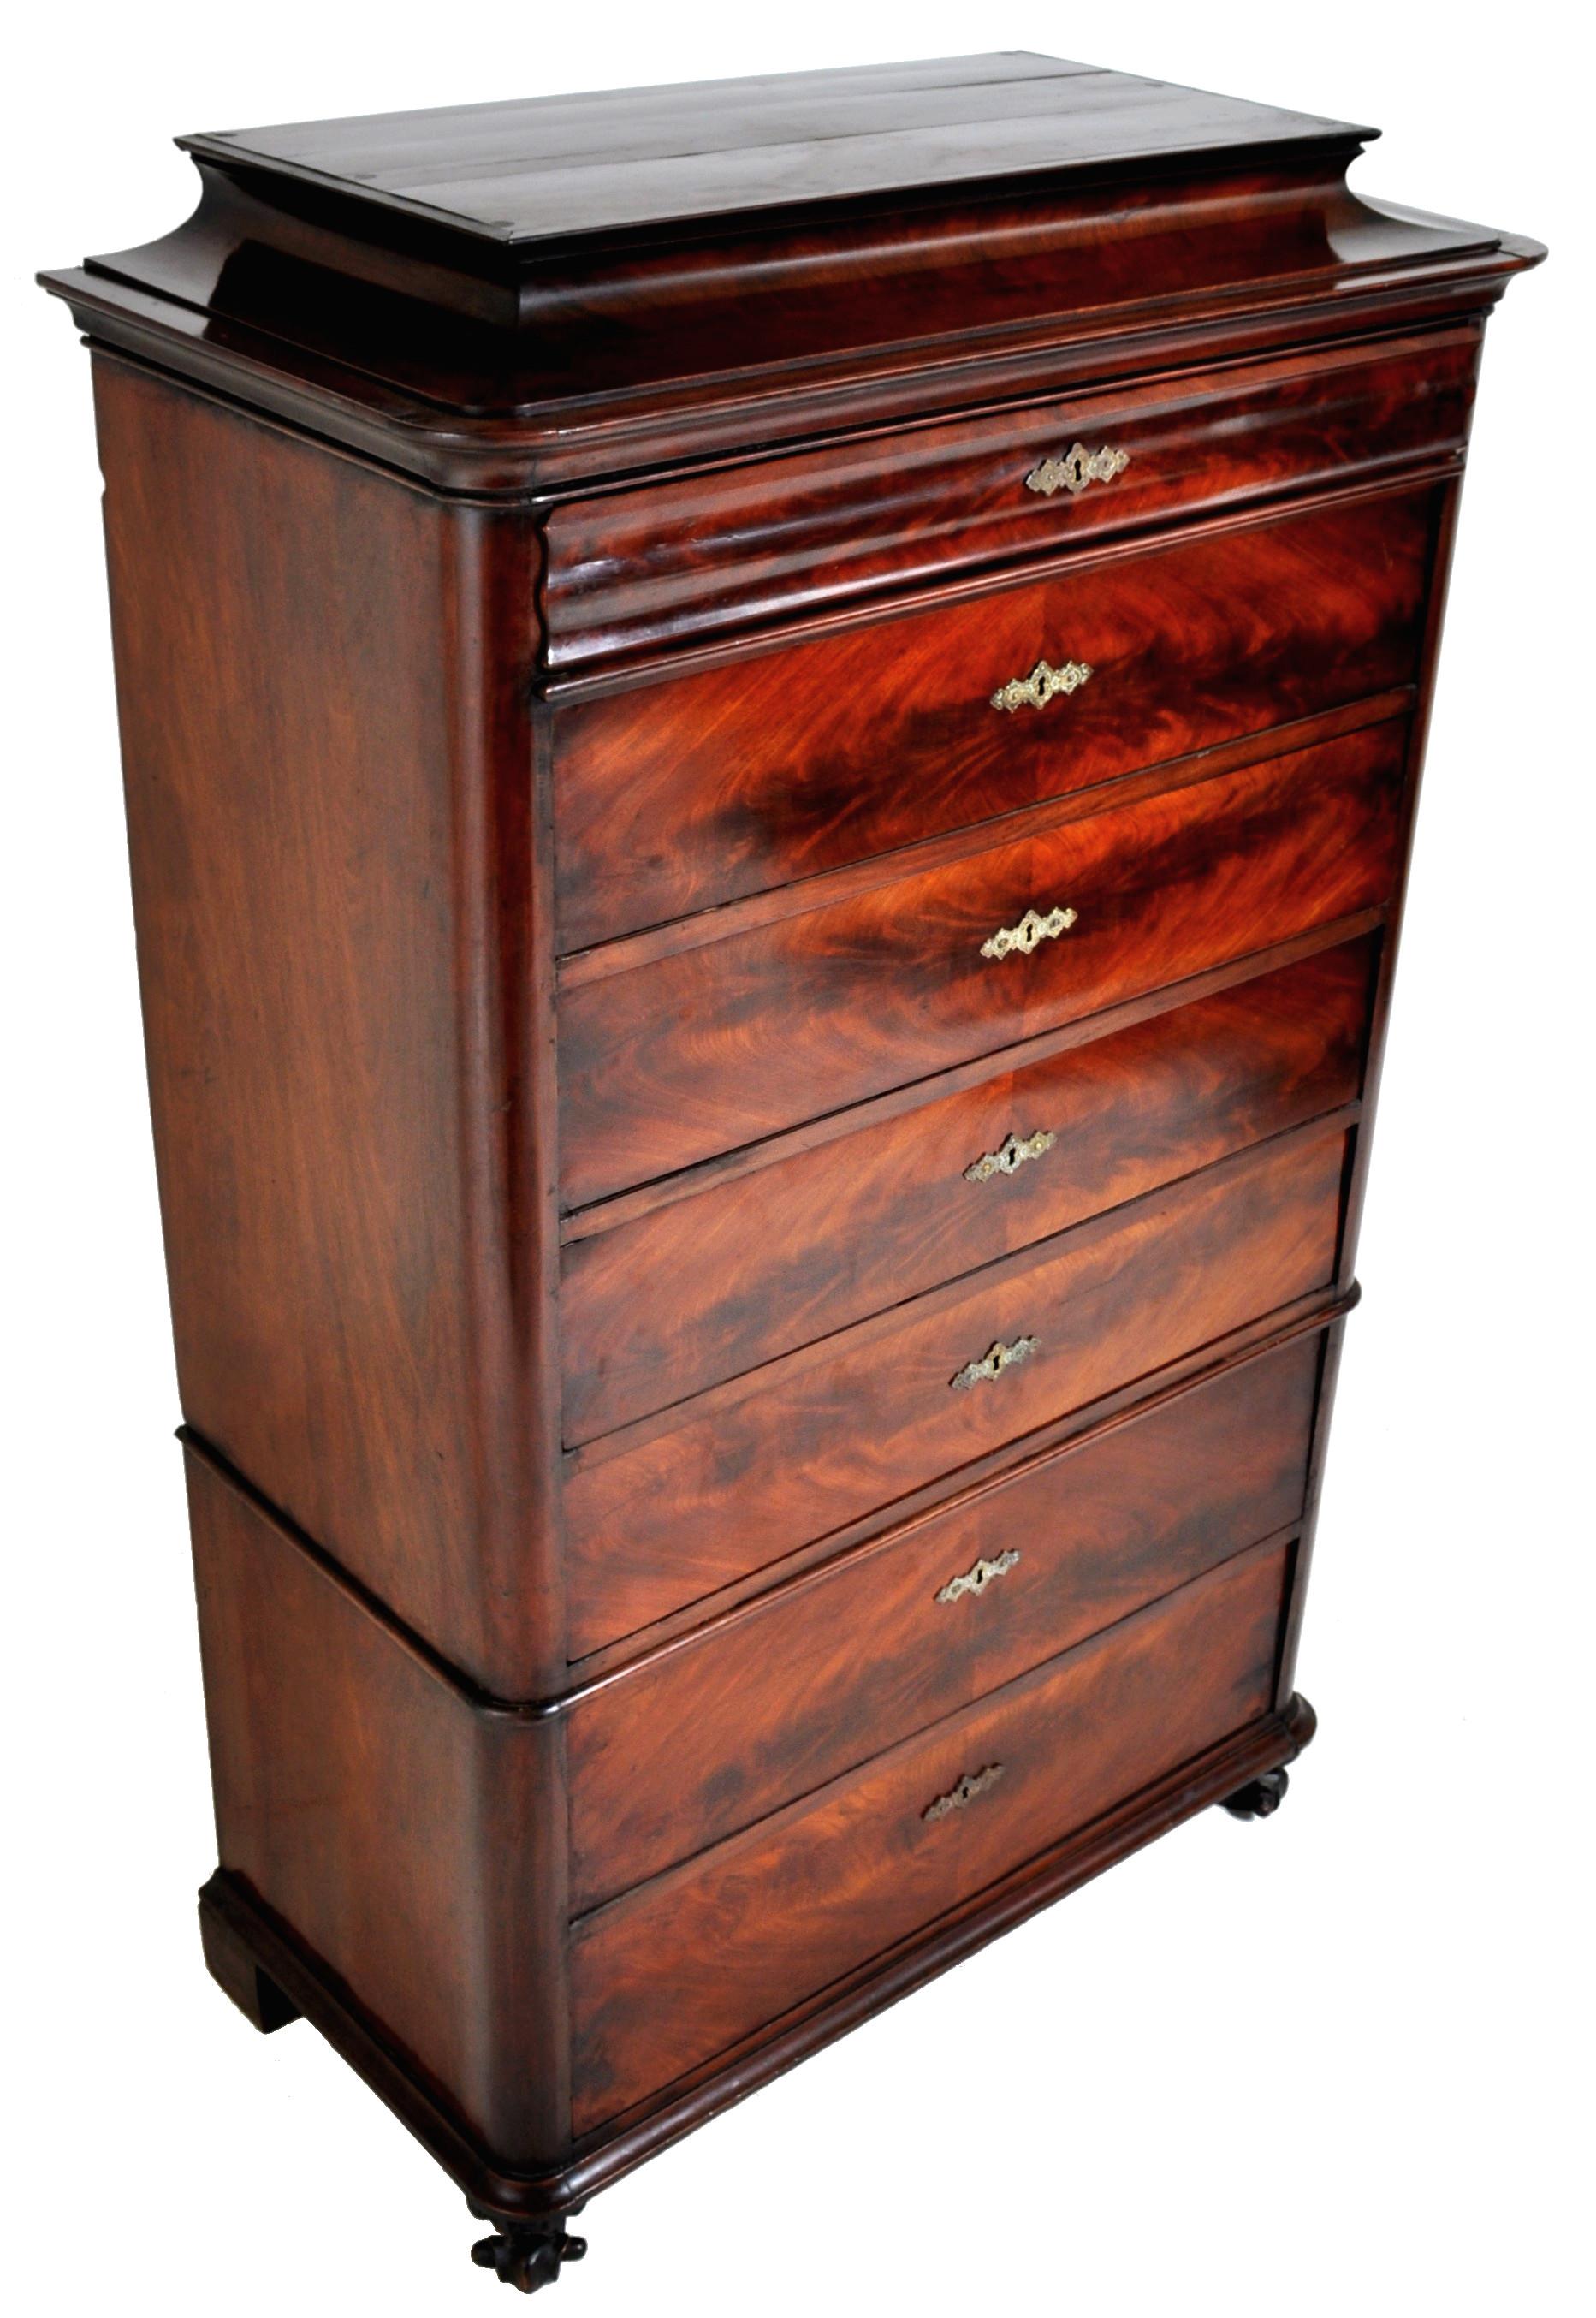 Antique Austrian seven-drawer Biedermeier figured walnut chest of drawers/semainier, circa 1830. The two-sectioned chest having a vaulted top with seven drawers below and standing on lion's paw feet, made from the finest figured walnut and in good